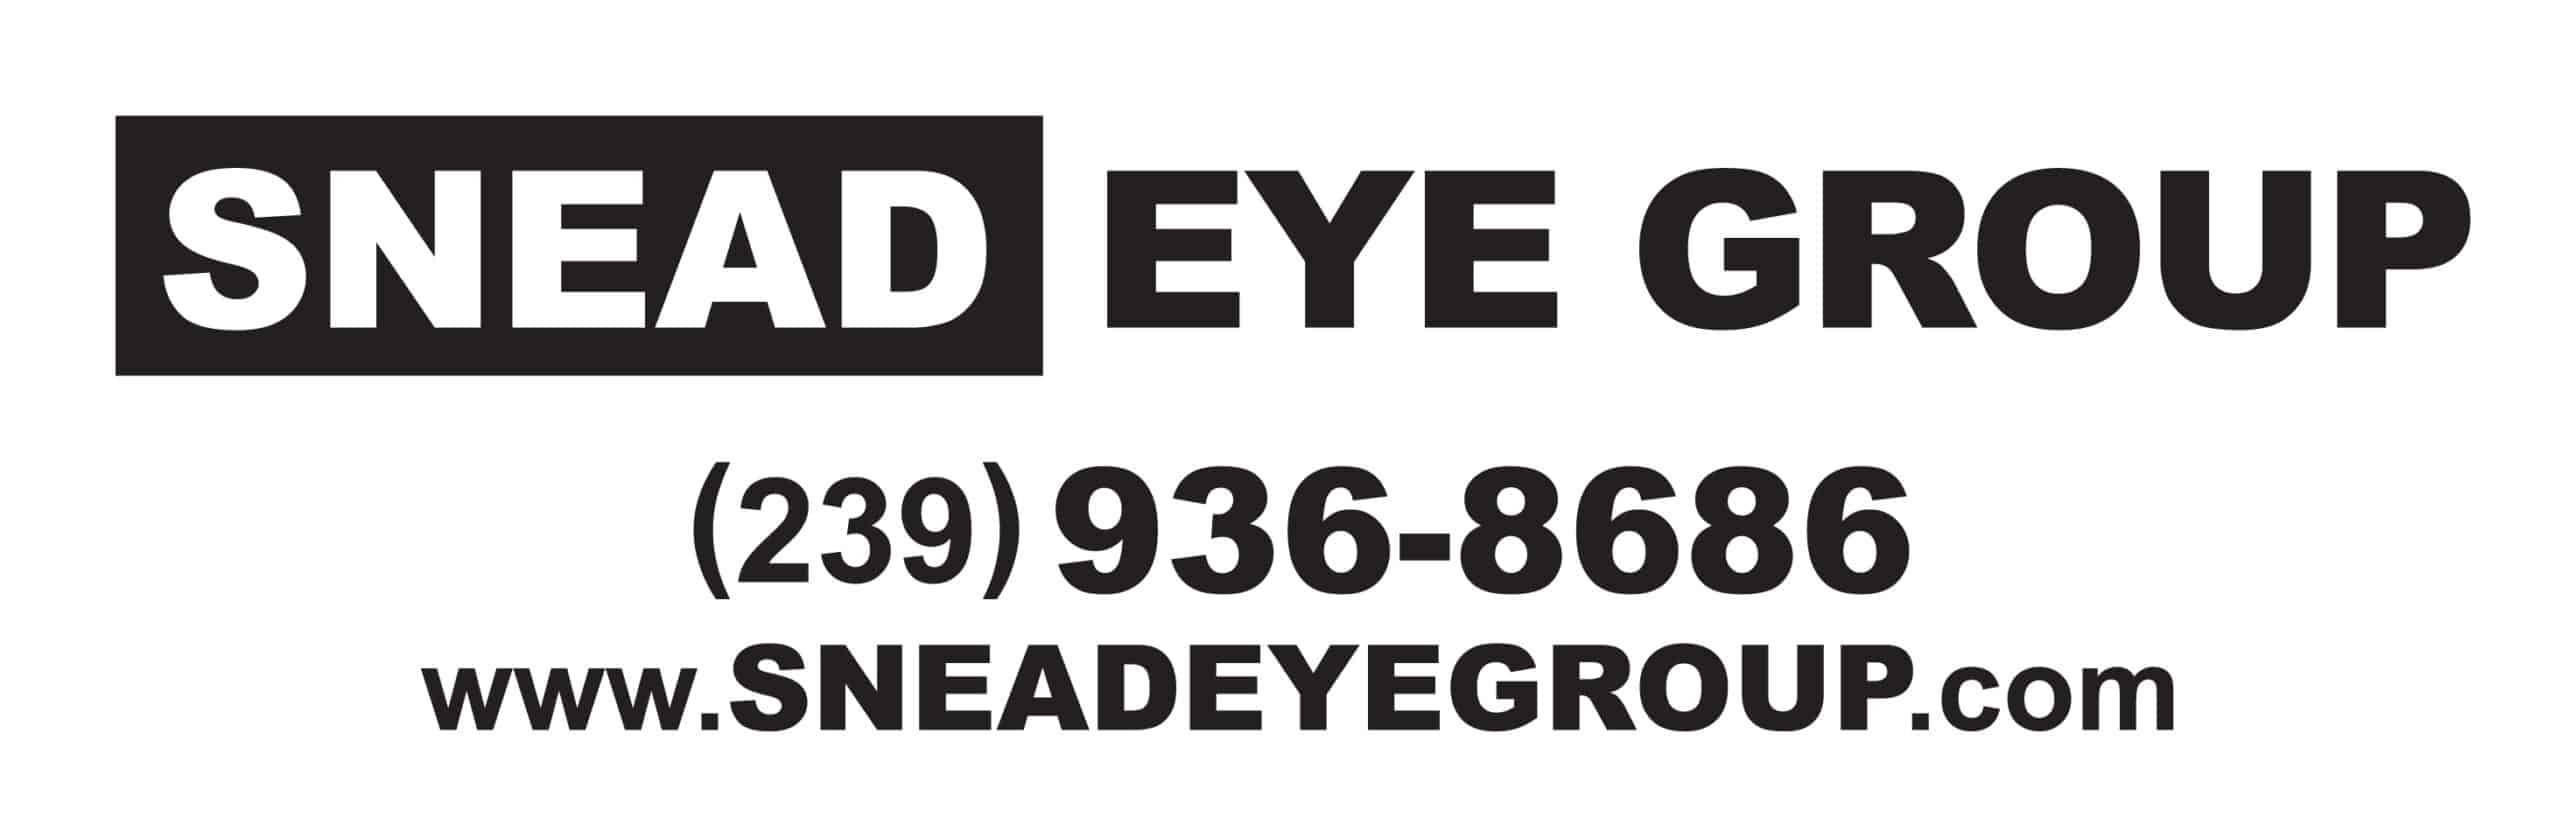 Snead Eye Group Southwest Florida Cataract Specialists